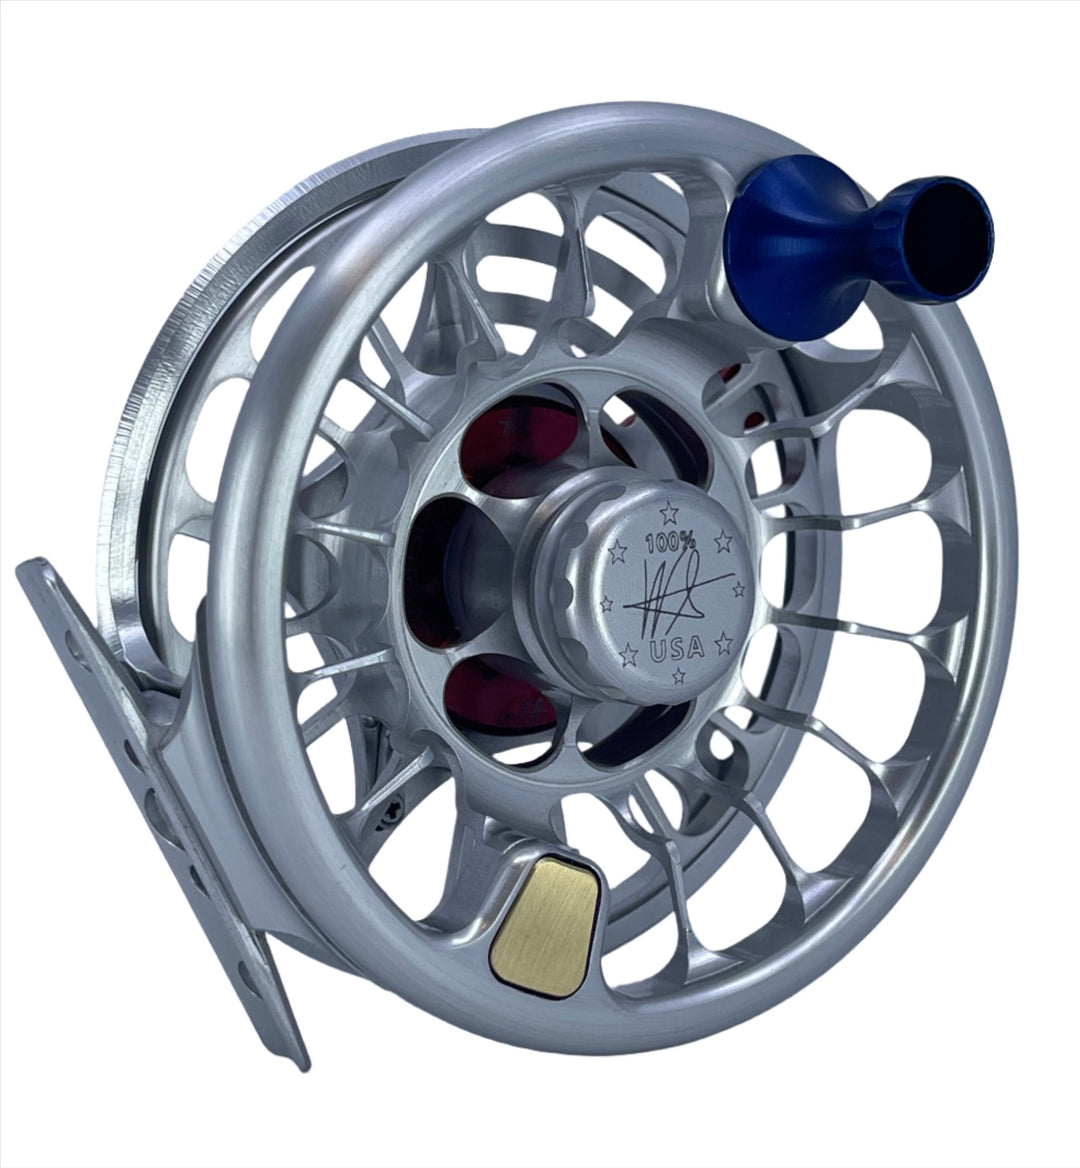 Seigler SF (6-8wt) -Silver w/ Matching Spool, Blue Drag Knob, Blue Handle, Red Lever, Red Thrust Plate (Custom -IN STOCK)